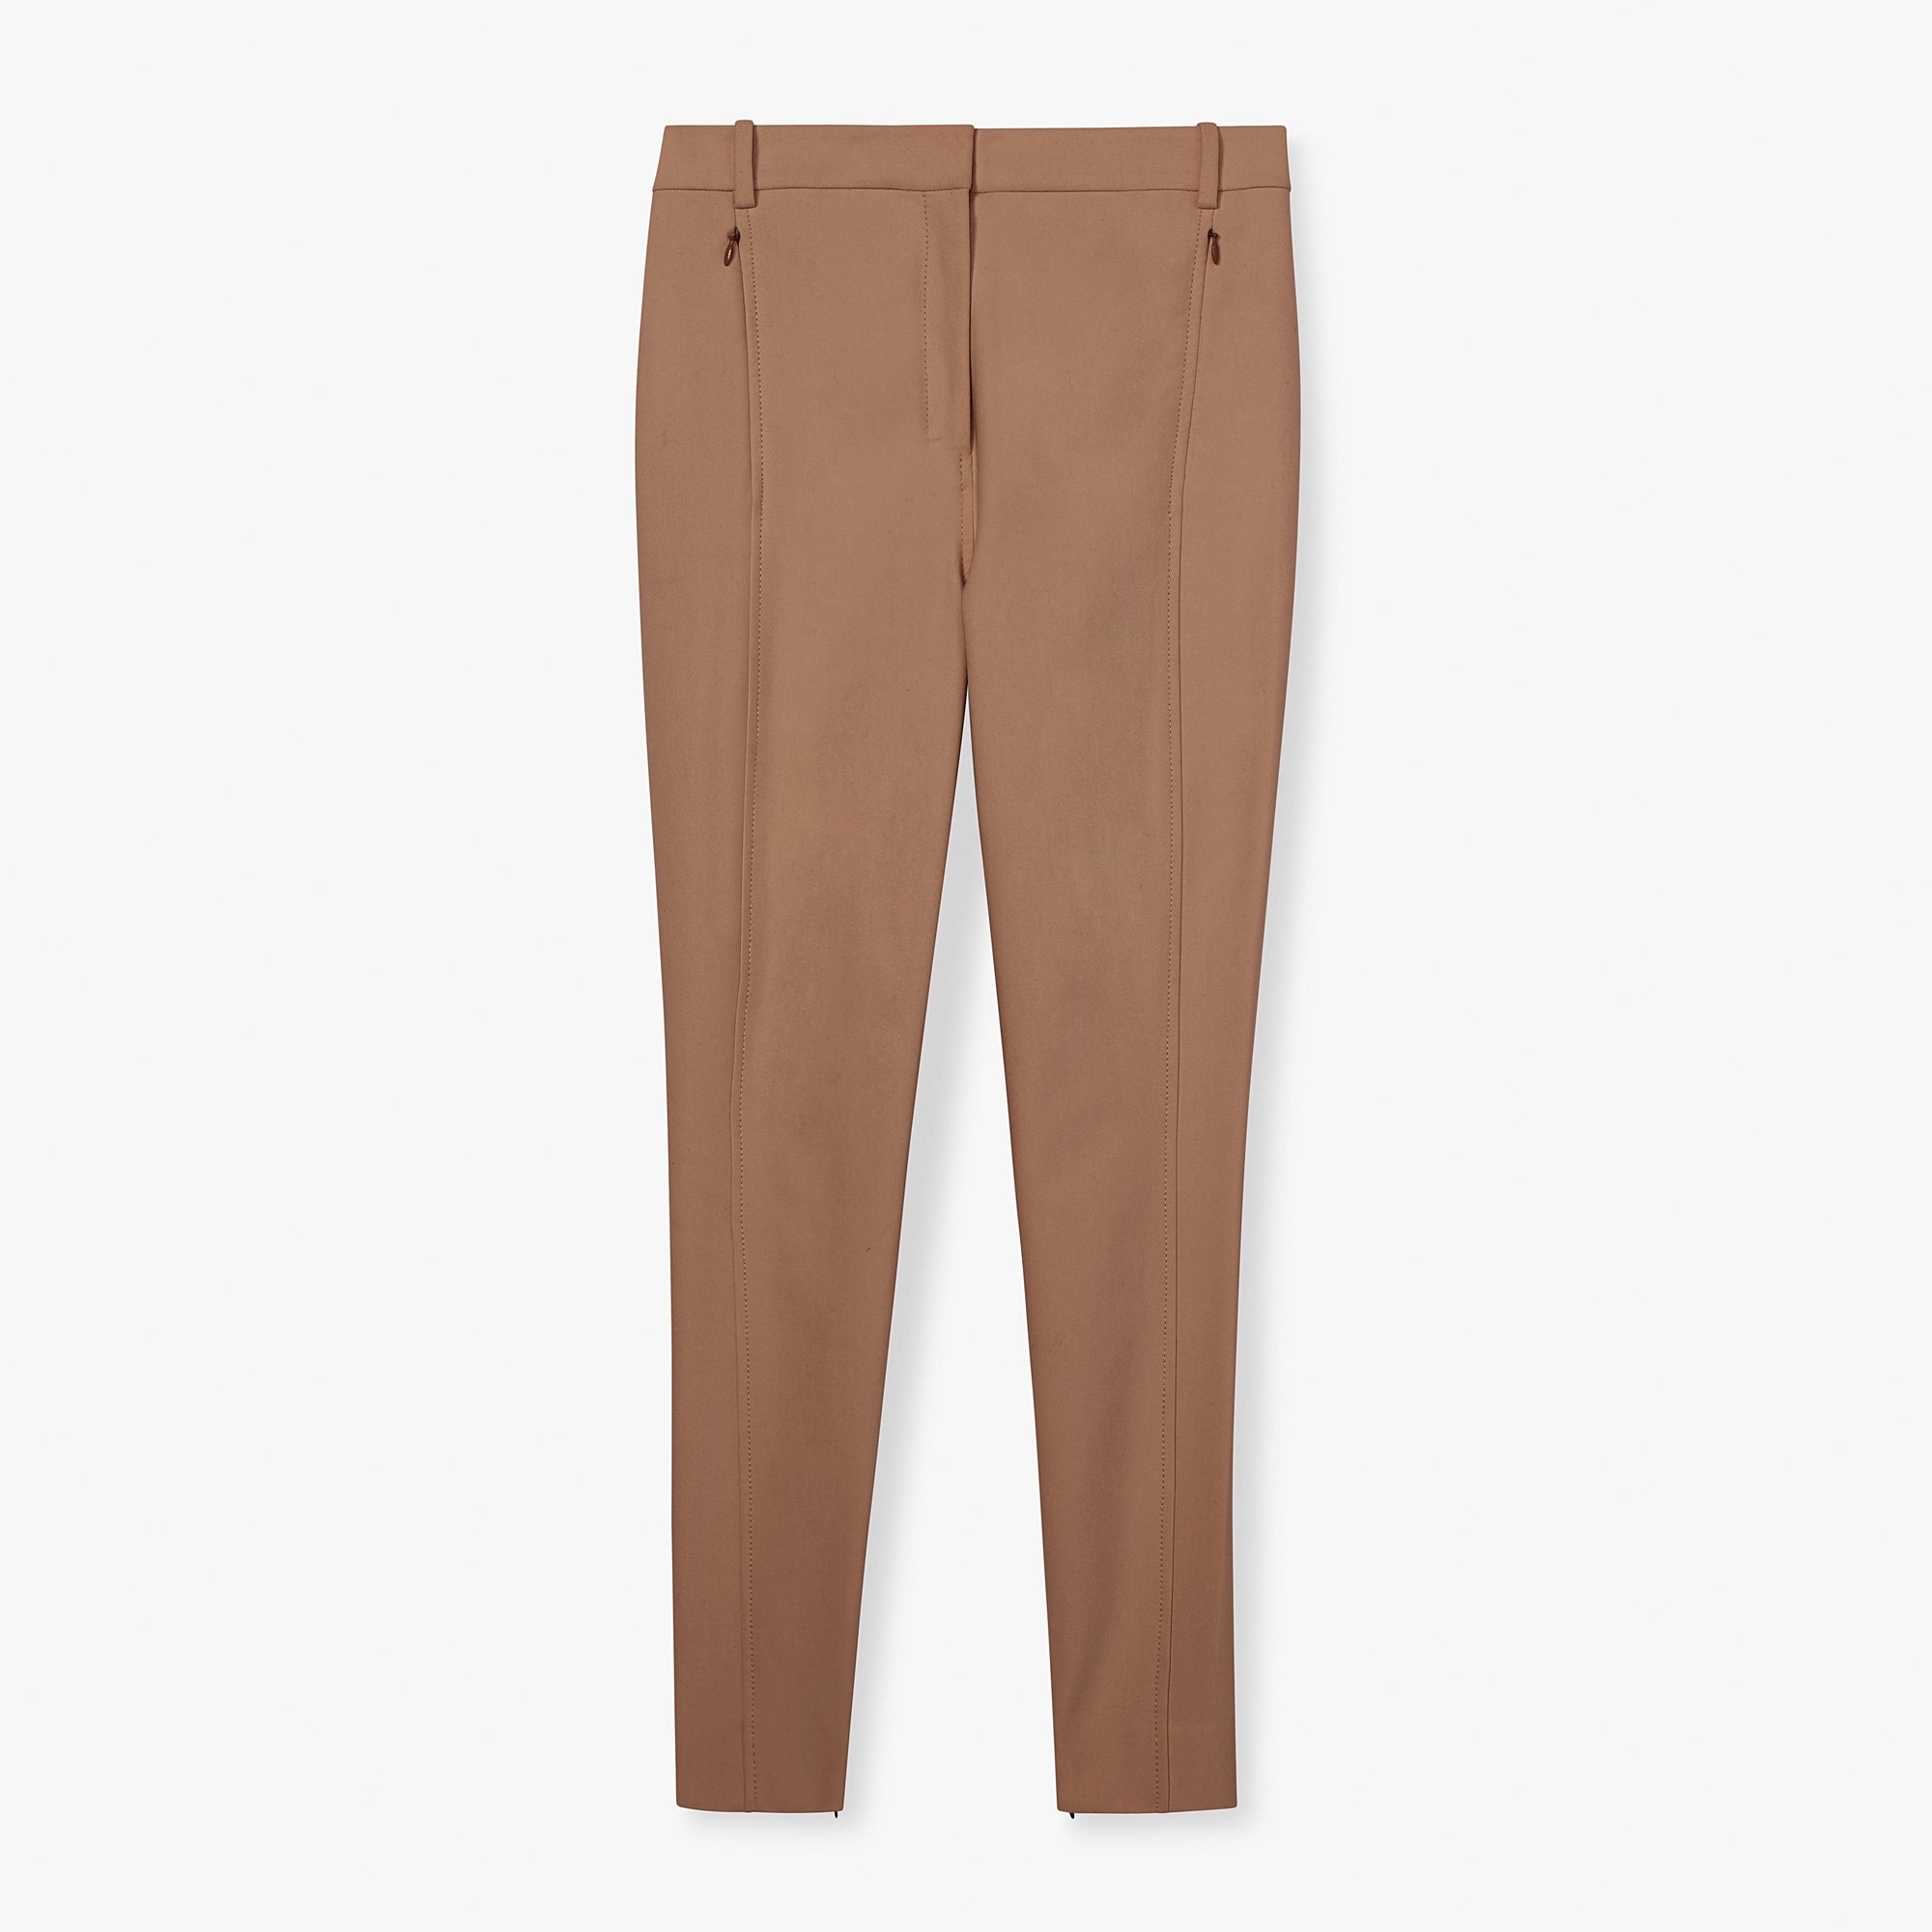 packshot image of the Curie Pant—Everstretch in saddle